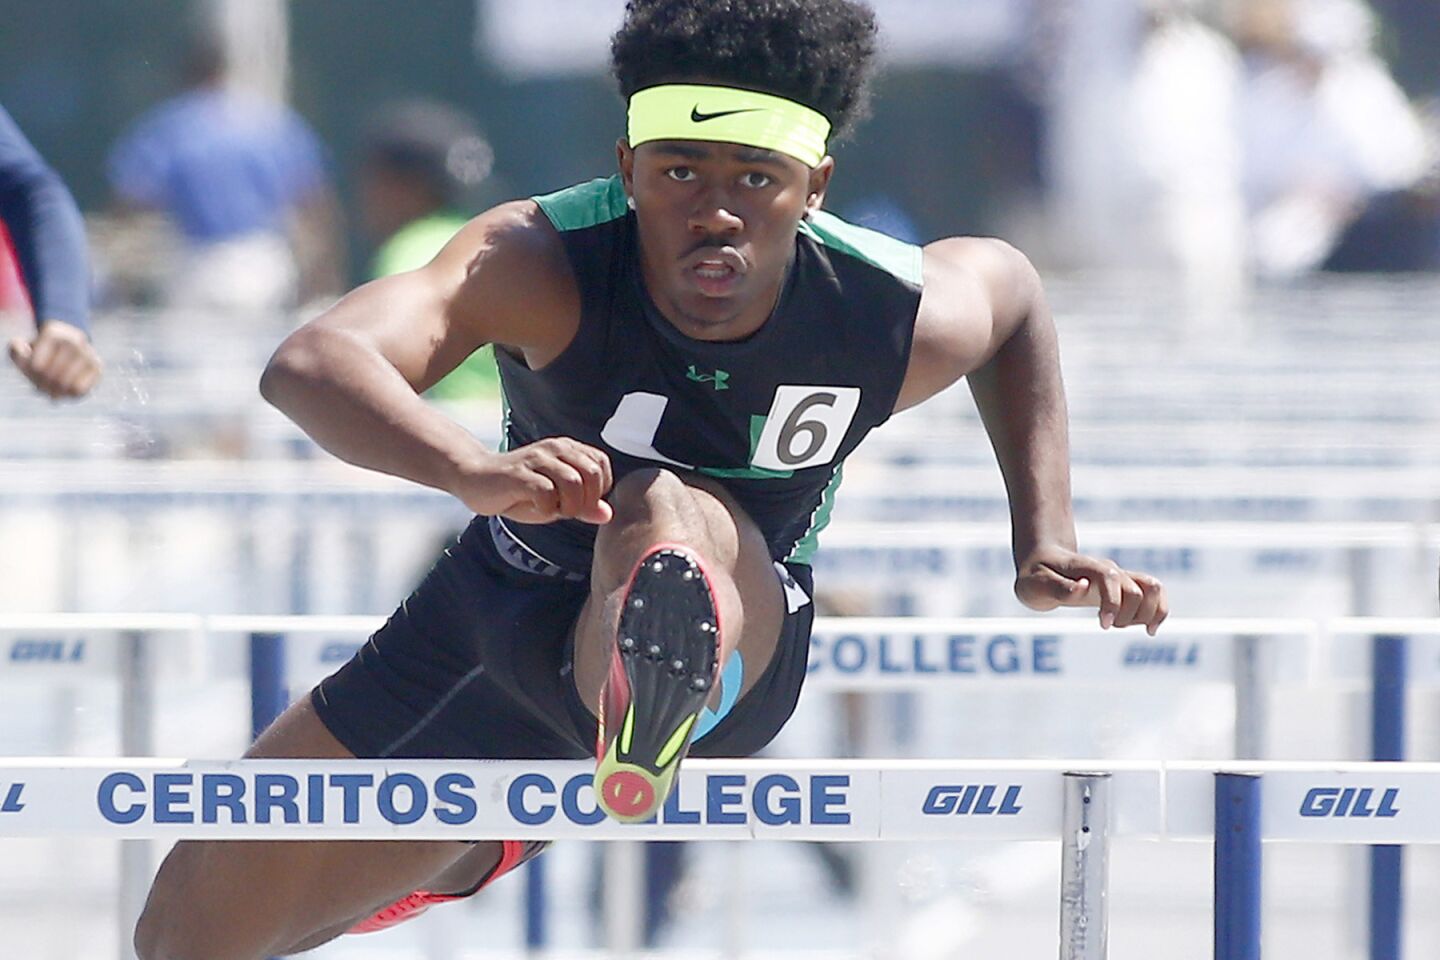 Upland's Joseph Anderson powers over the last hurdle to win the Division 1 boys' 110-meter hurdles during the CIF Southern Section finals at Cerritos College.